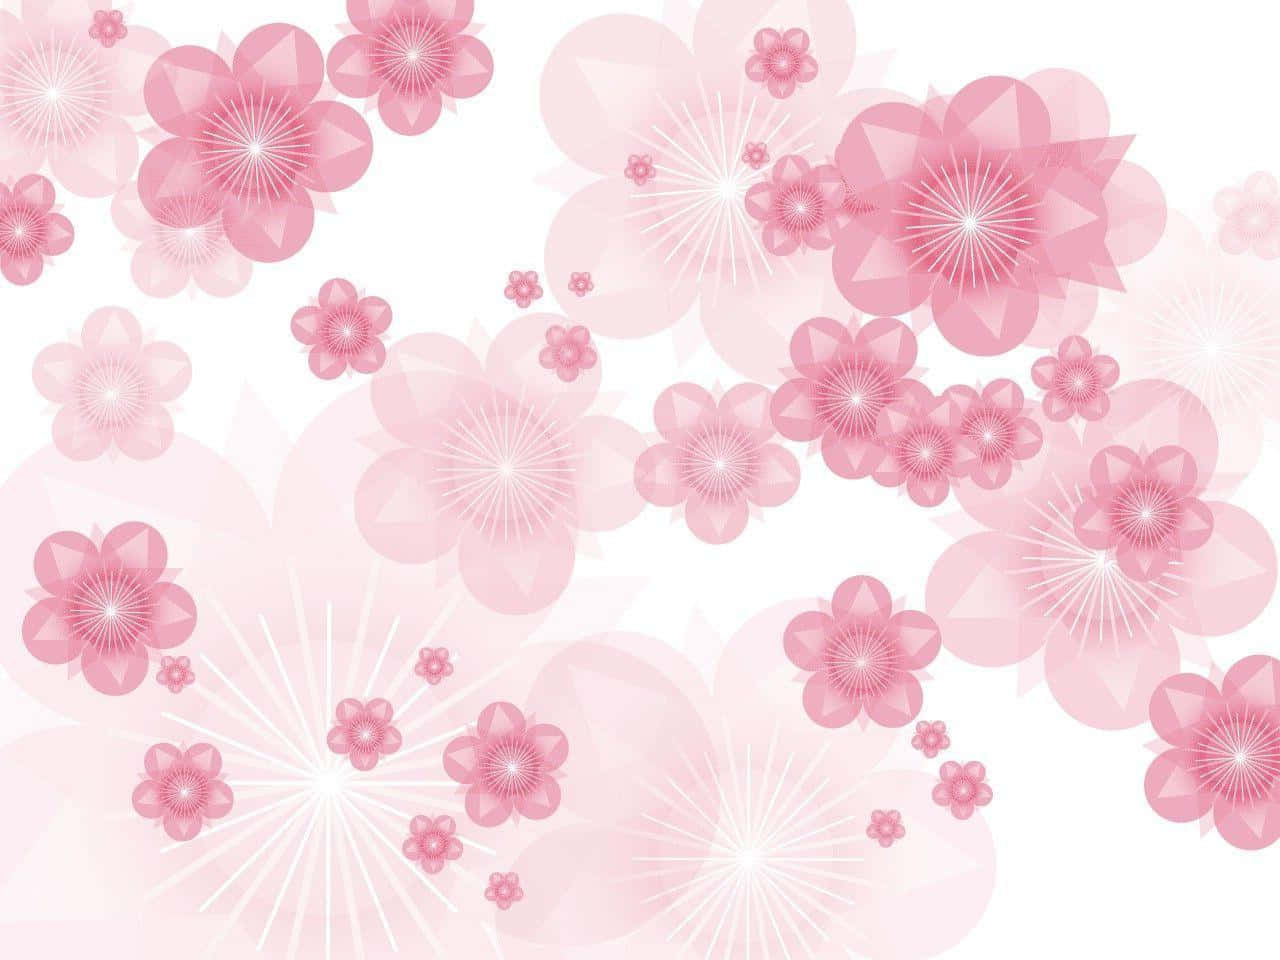 A Pink Flower Background With White Flowers